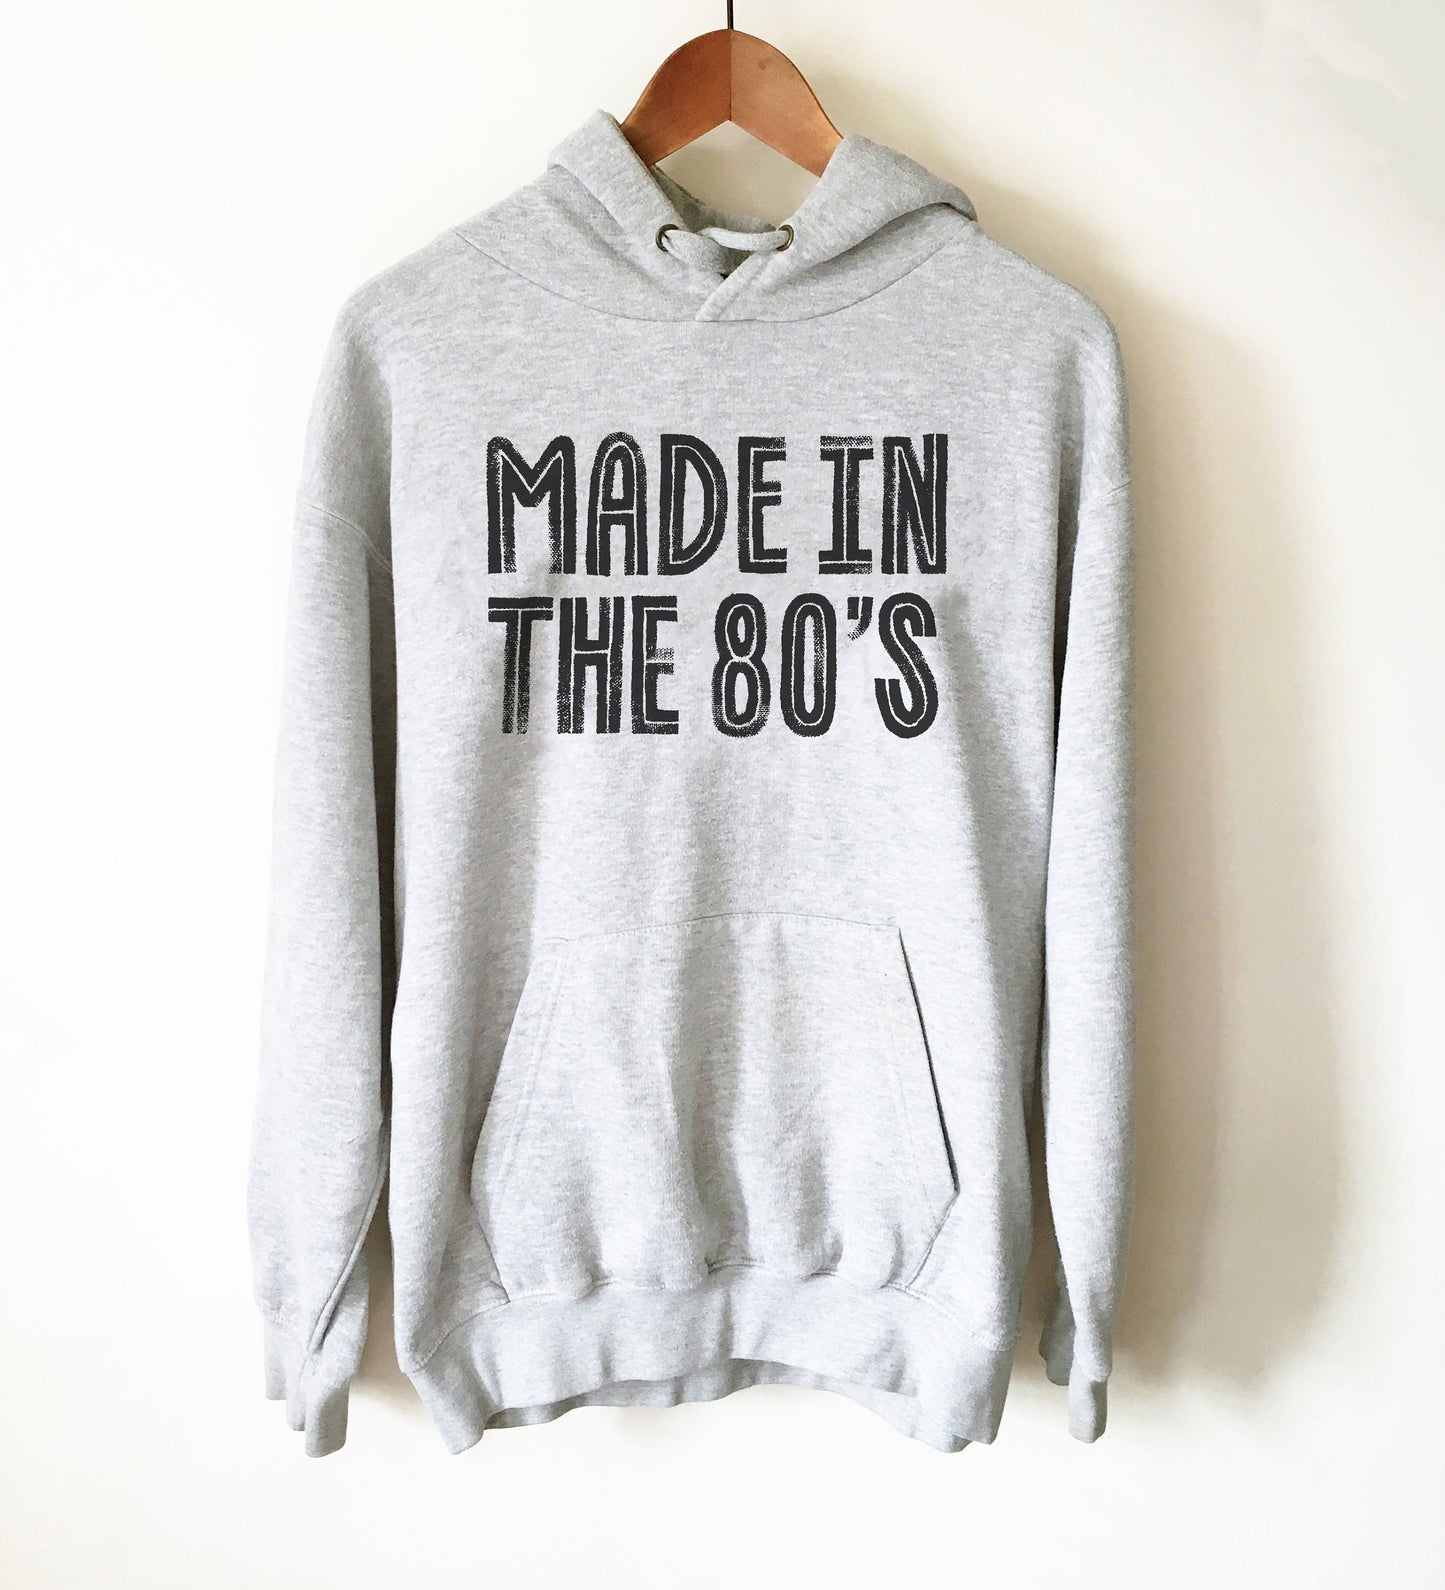 Made In The 80's Hoodie - 80s T Shirt, Retro, DJ Shirt, 80s Clothing, Disk Jockey Gift, Vintage 80s T Shirt, Cassette Tape, 80s Music